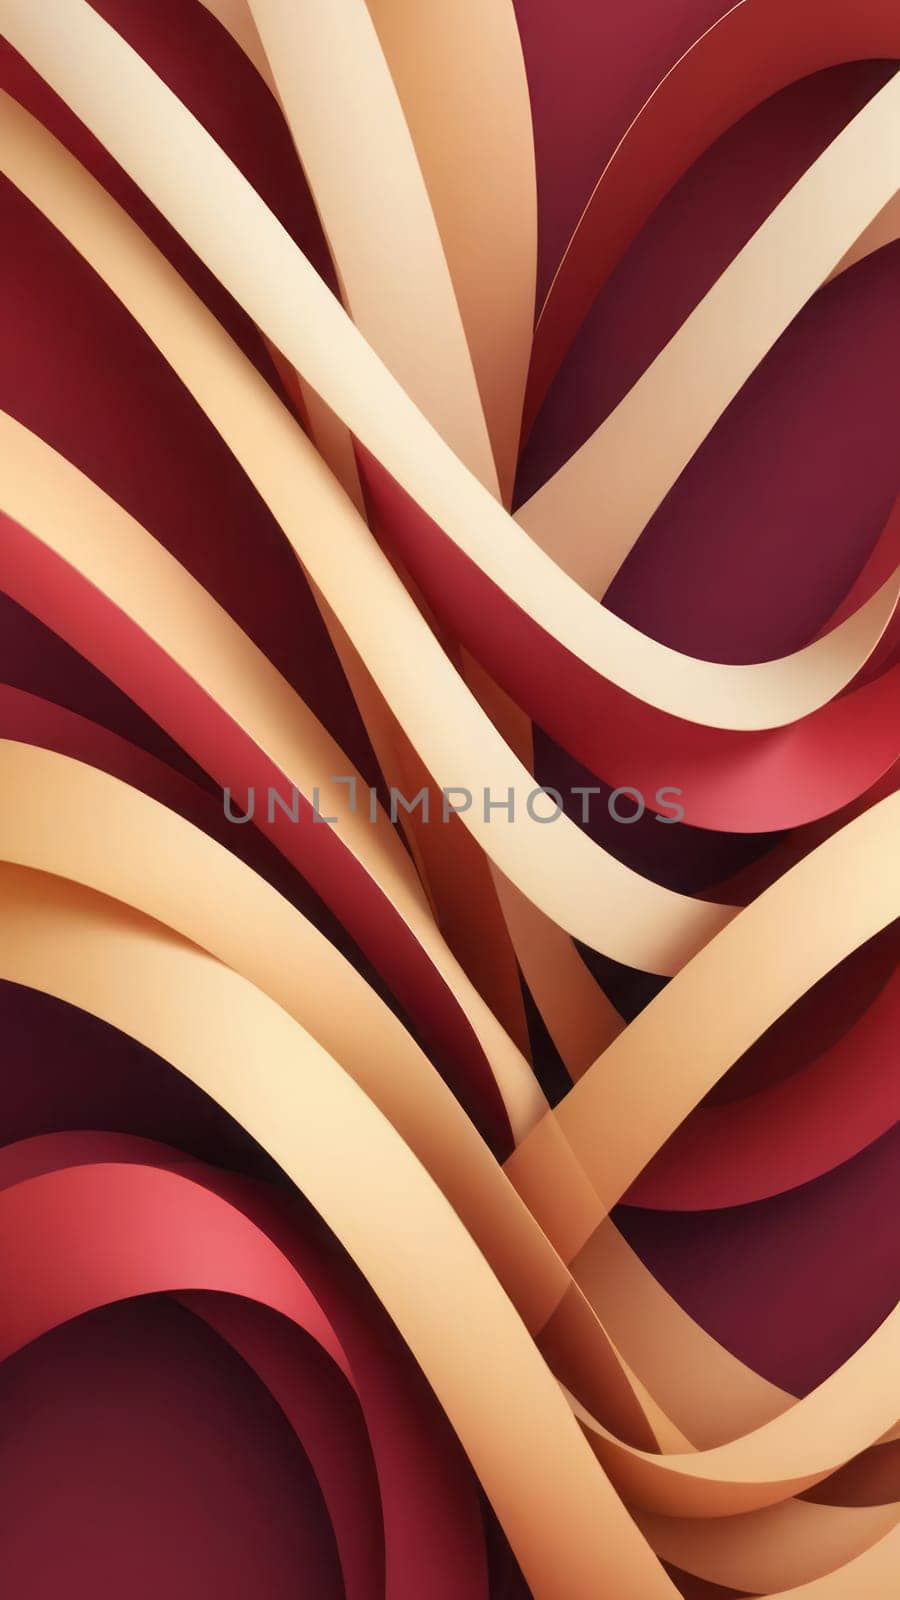 Art for inspiration from Intertwined and maroon by nkotlyar